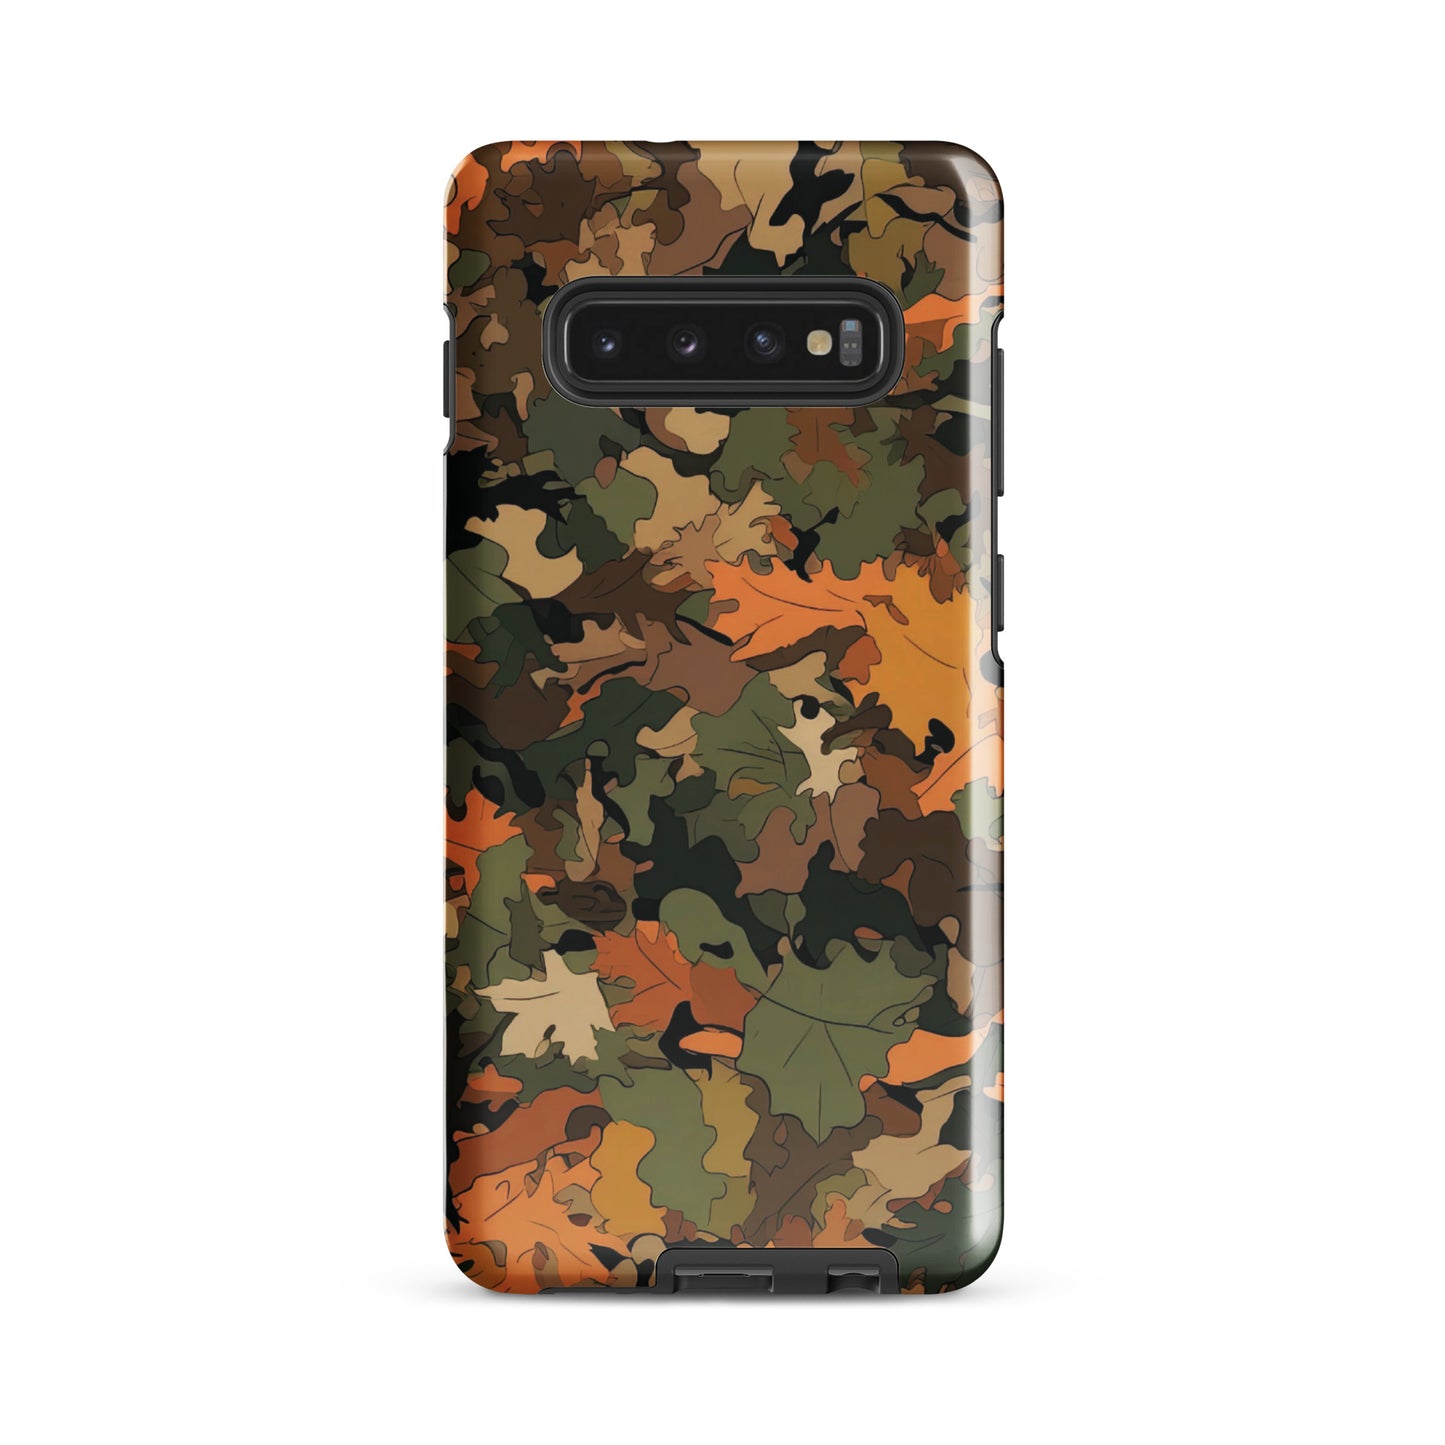 Muley Slayer - Tough case for Samsung®